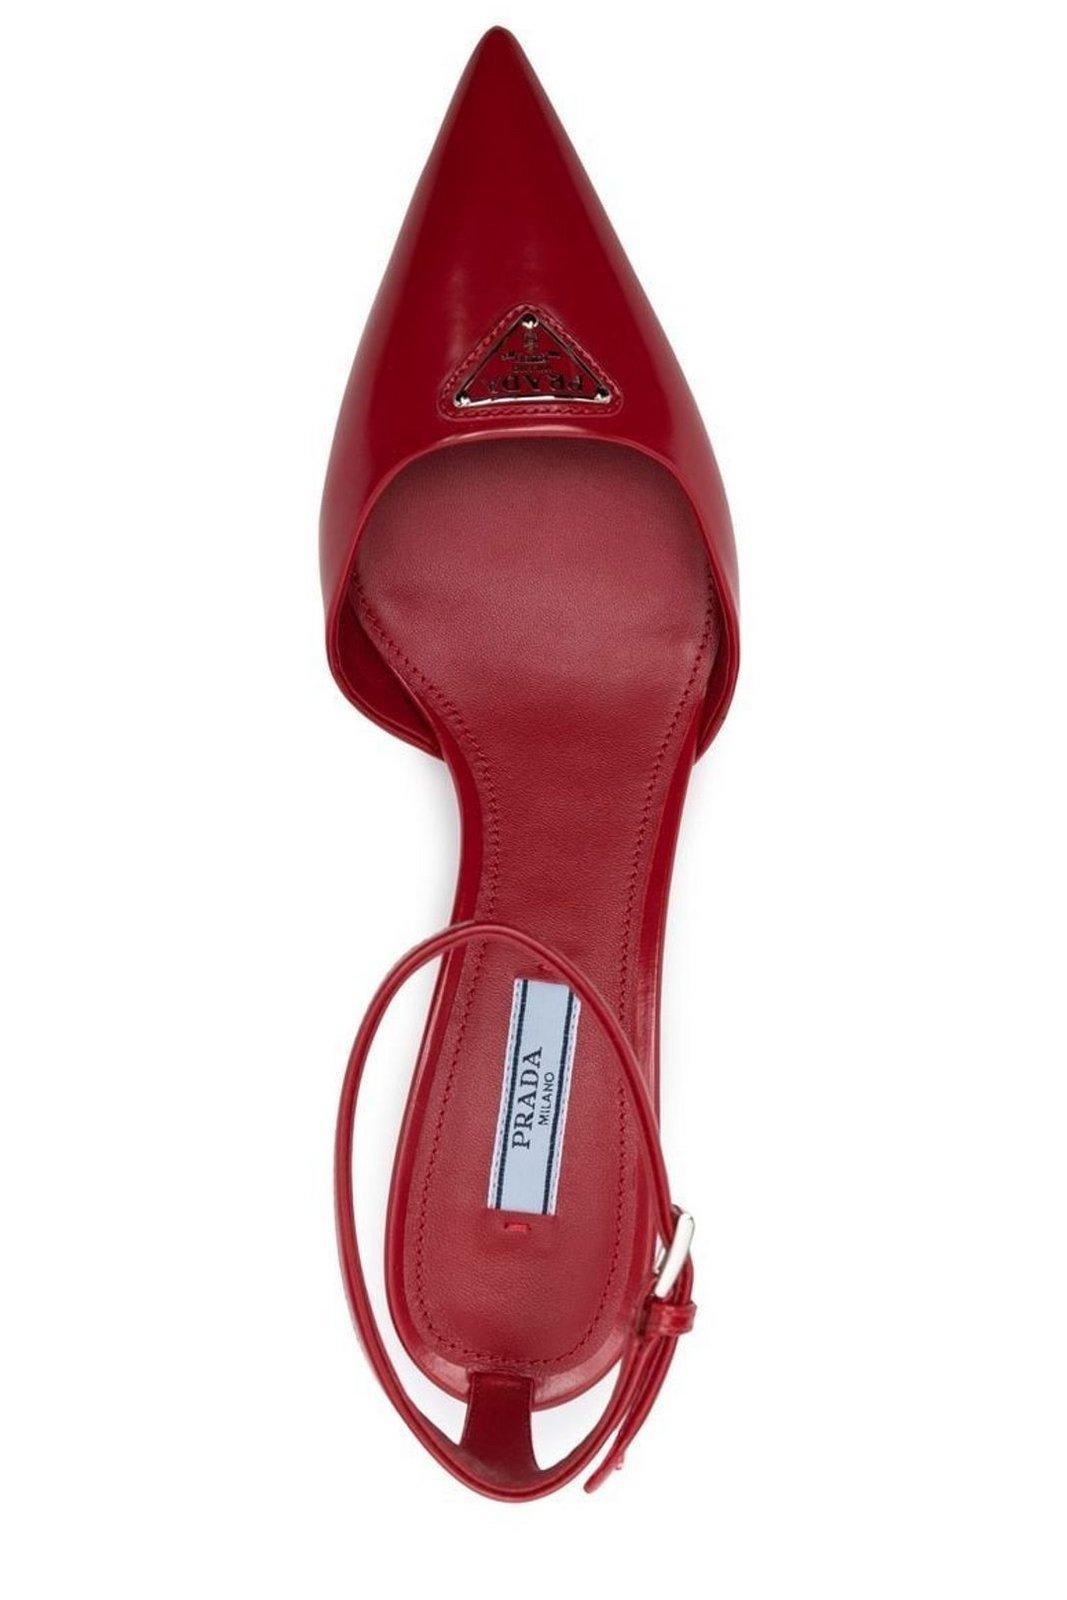 Prada Logo Plaque Ankle Strap Pumps in Red | Lyst